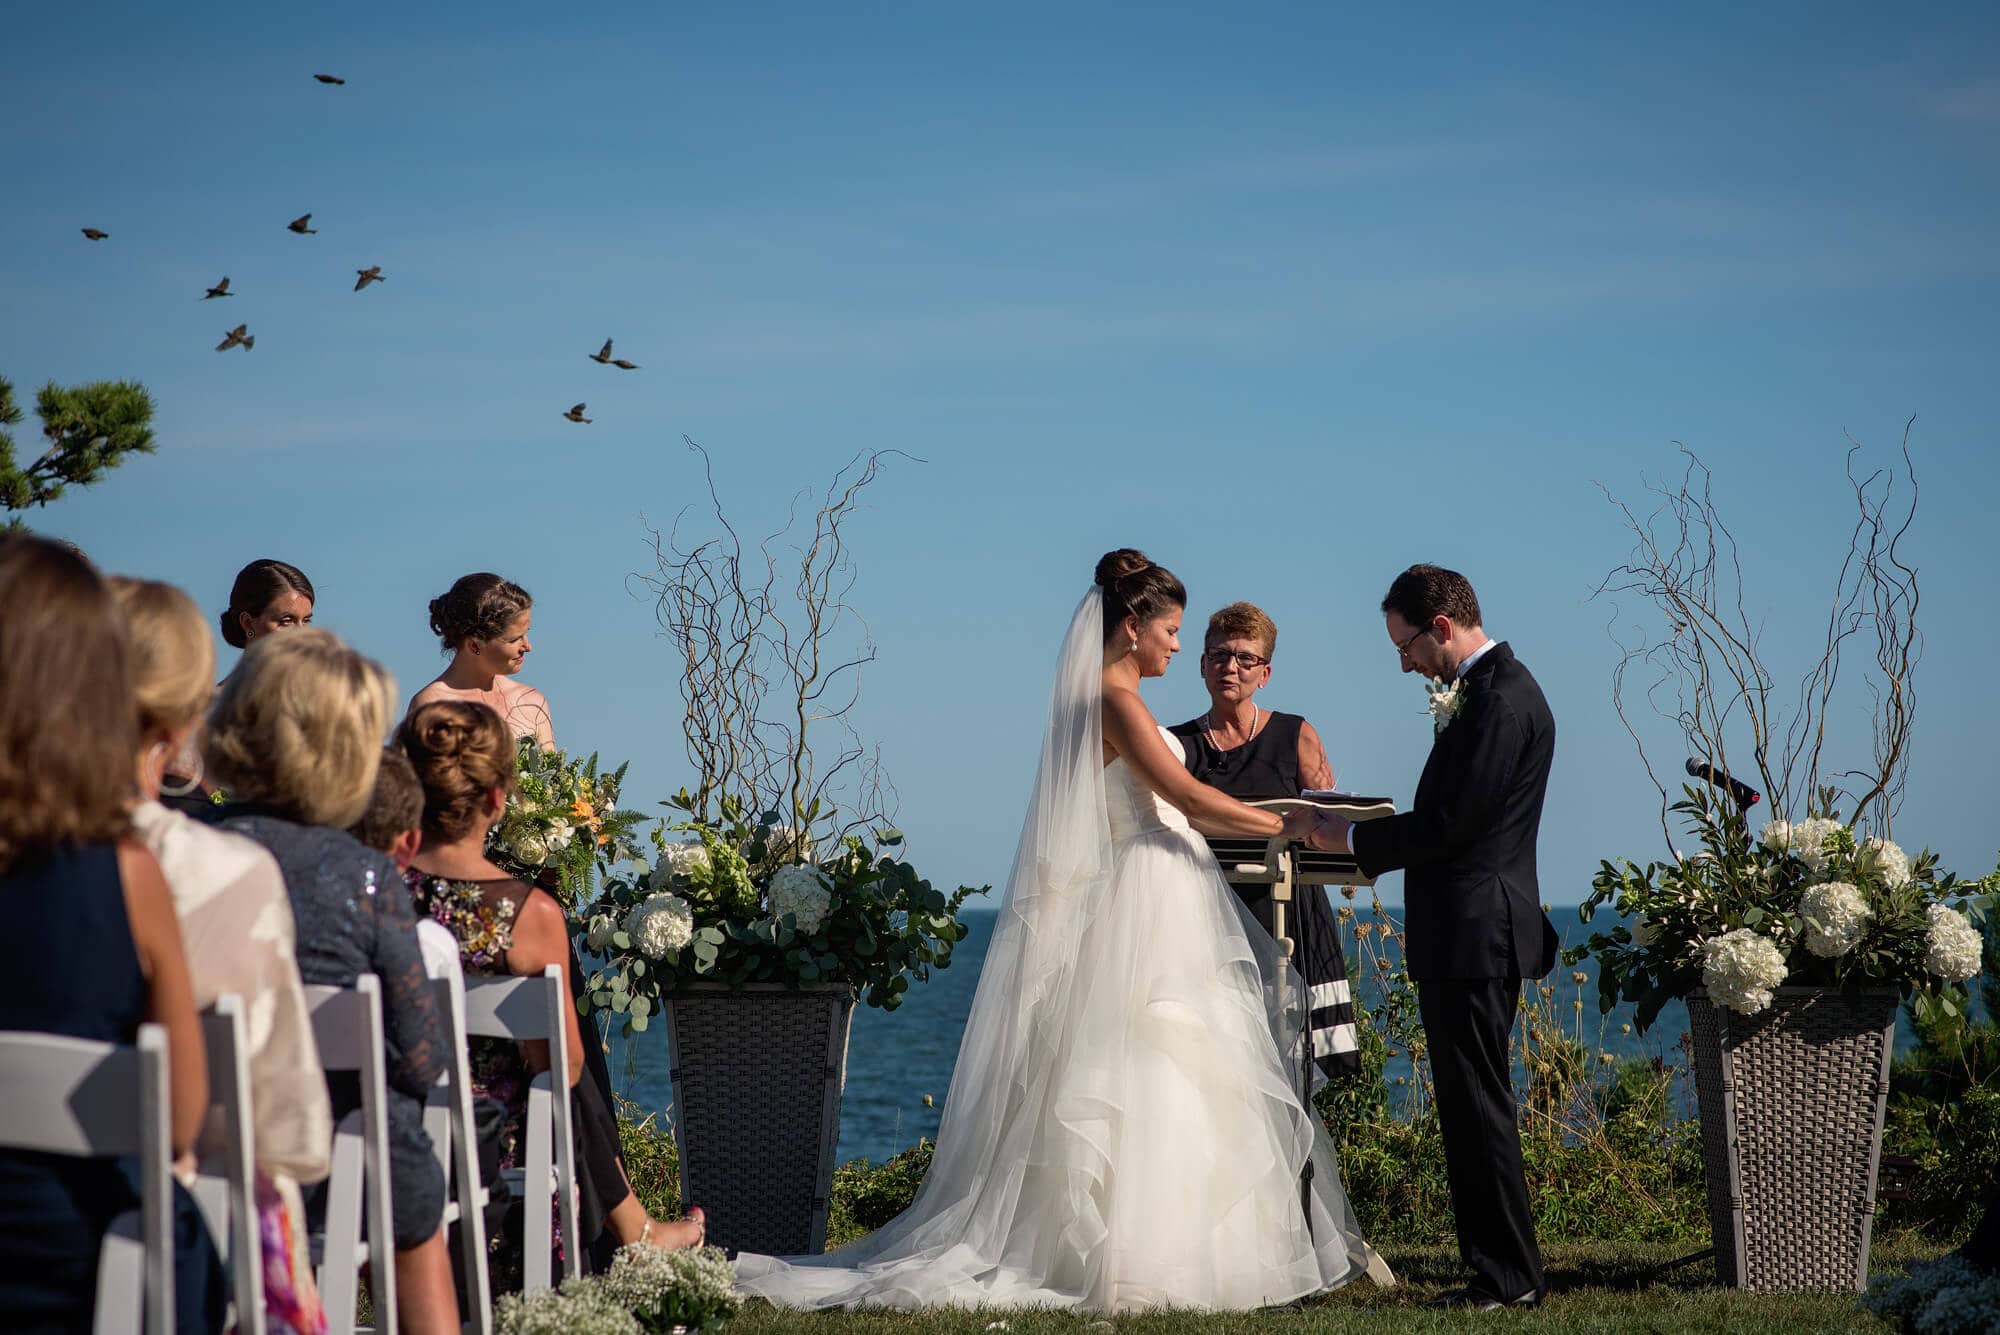 birds fly over during a Wianno club wedding ceremony on the lawn